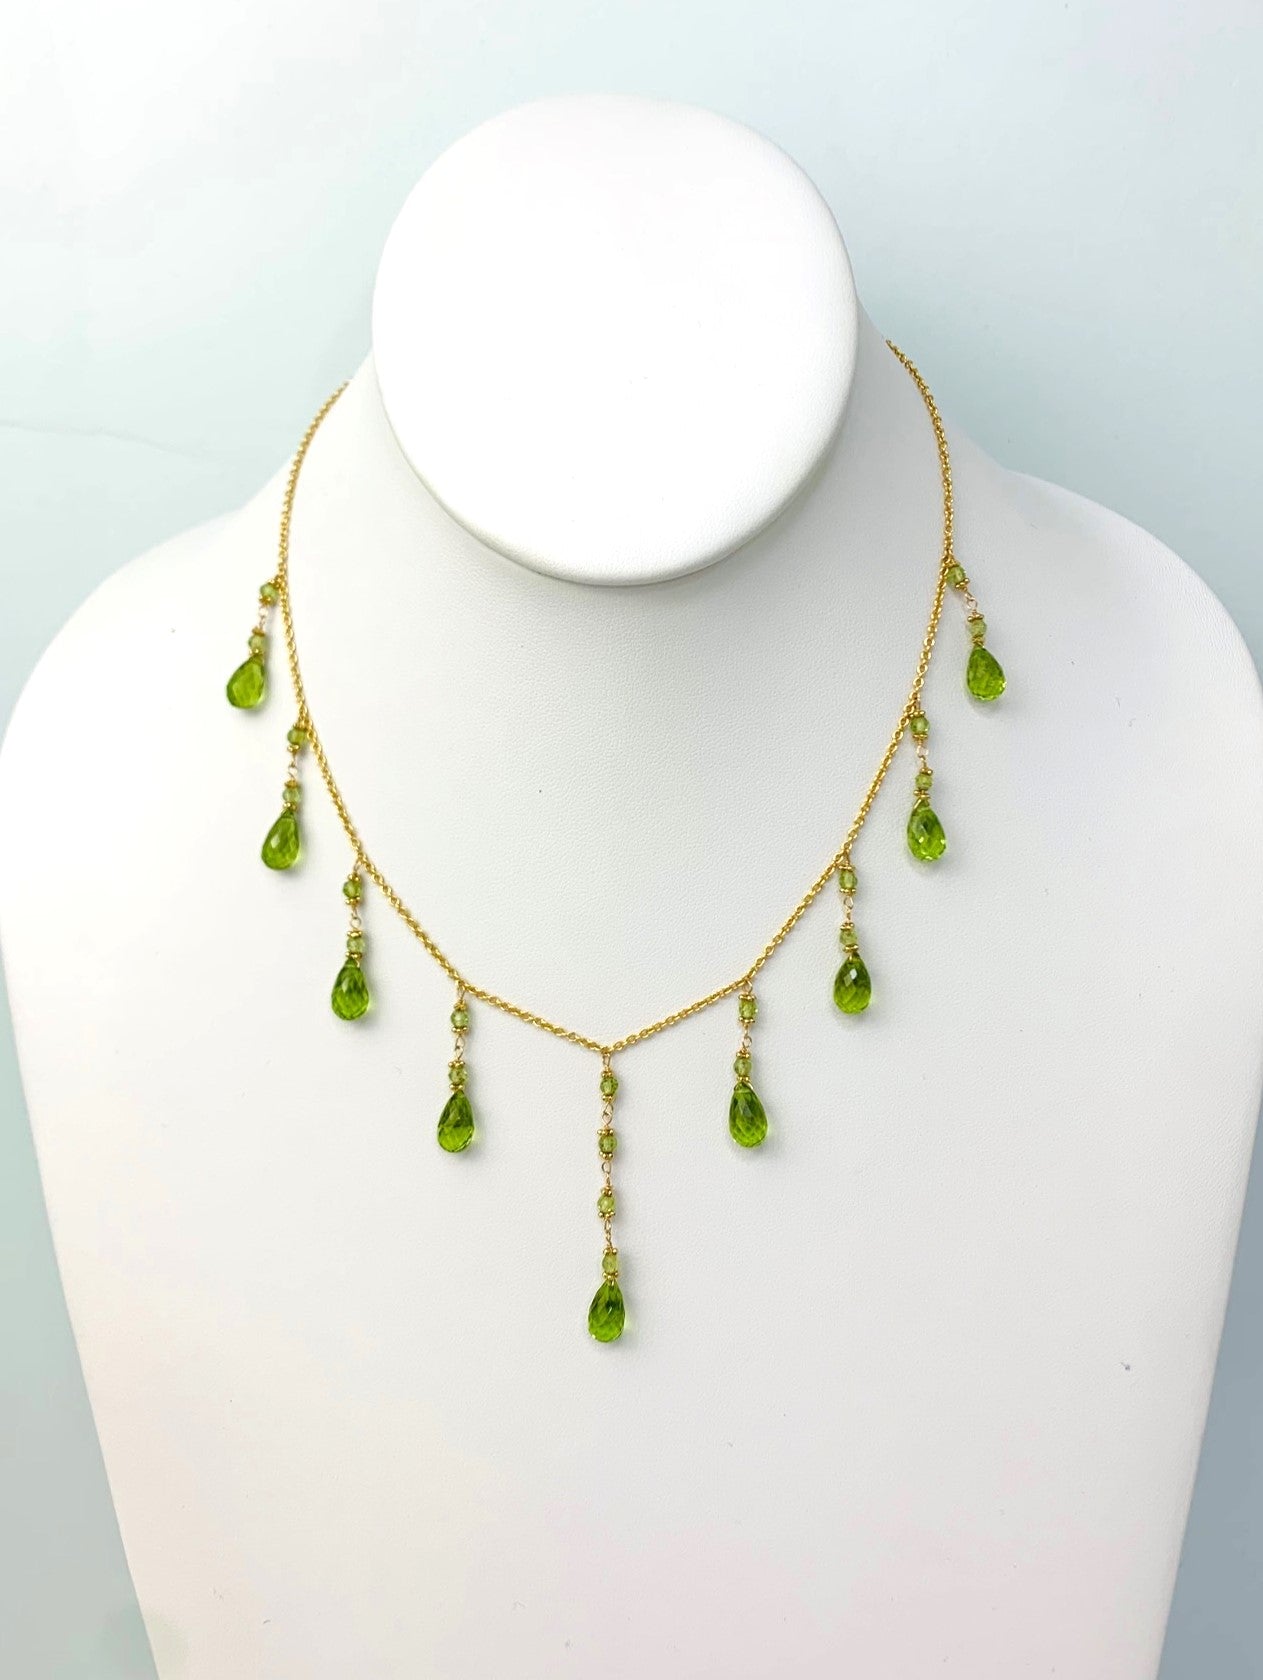 16" - 17" Peridot Cleopatra Necklace in 14KY - NCK-003-CLEOPRLGM14Y-WHPD-17